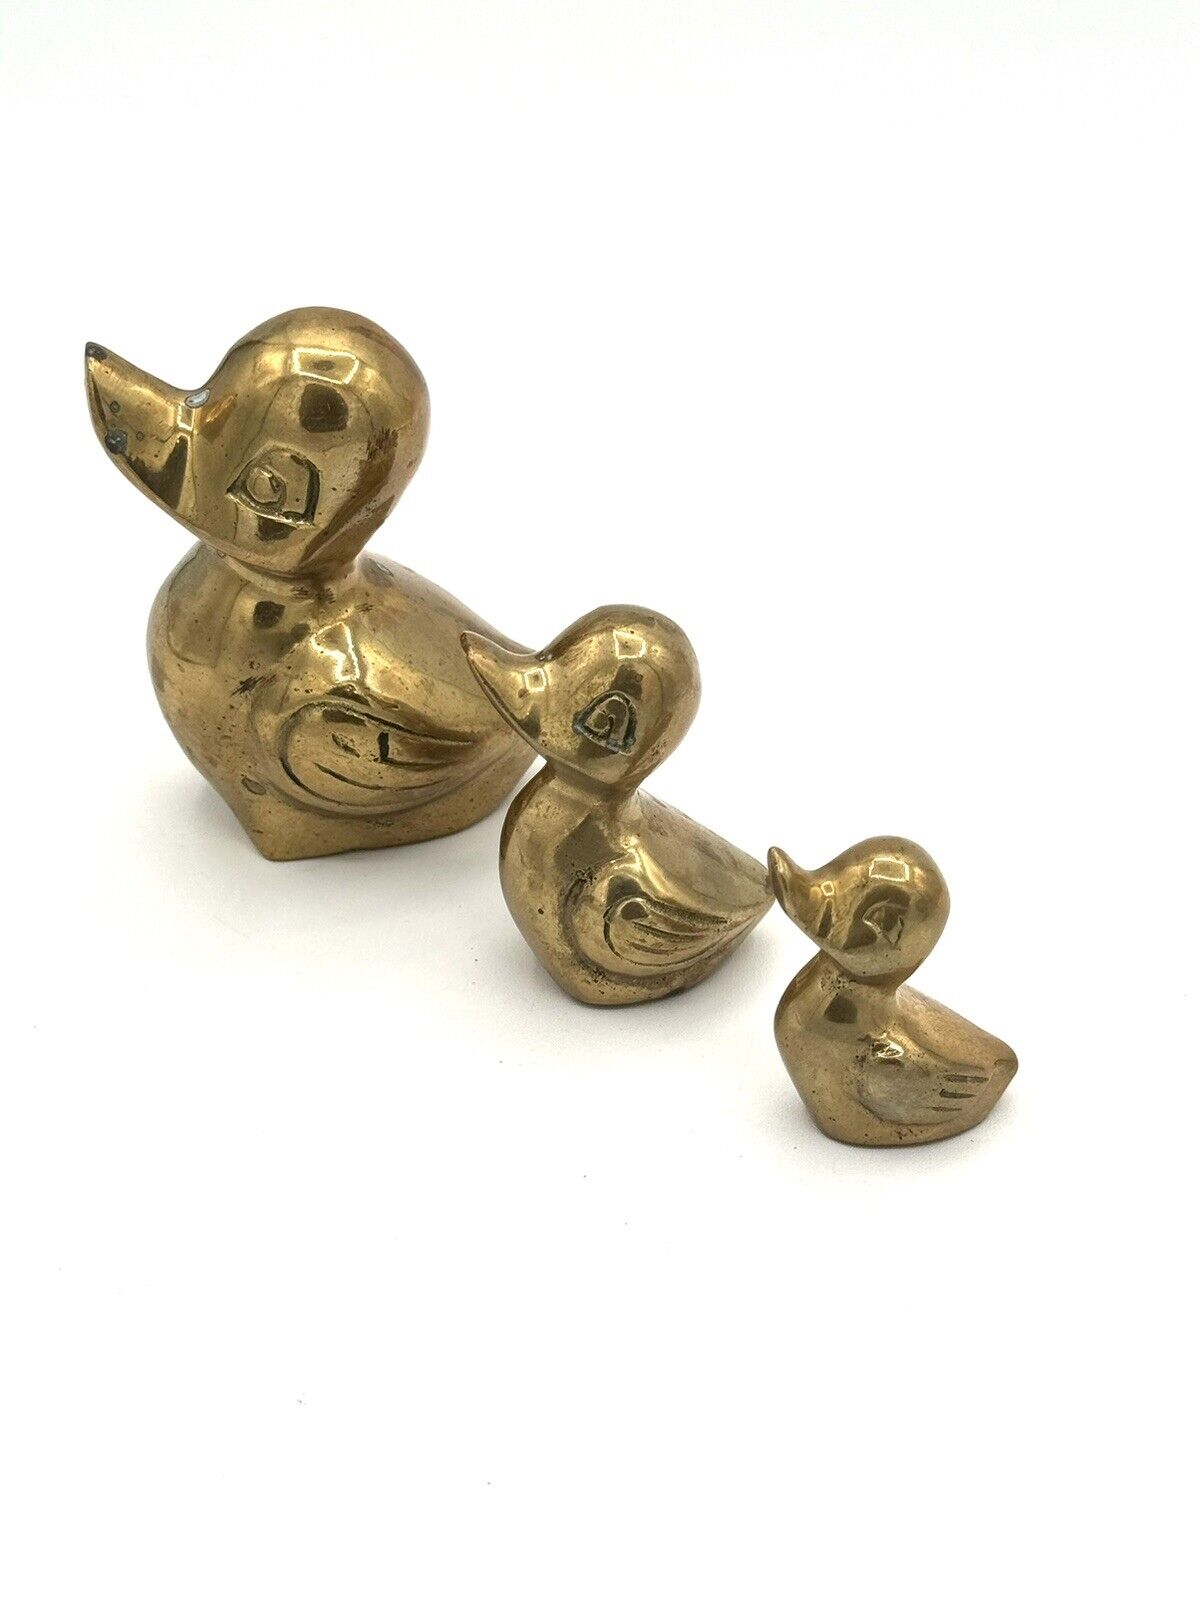 VTG Solid Brass Duck Family Figurine Set of 3 Mama/Ducklings 3” MCM Home Decor